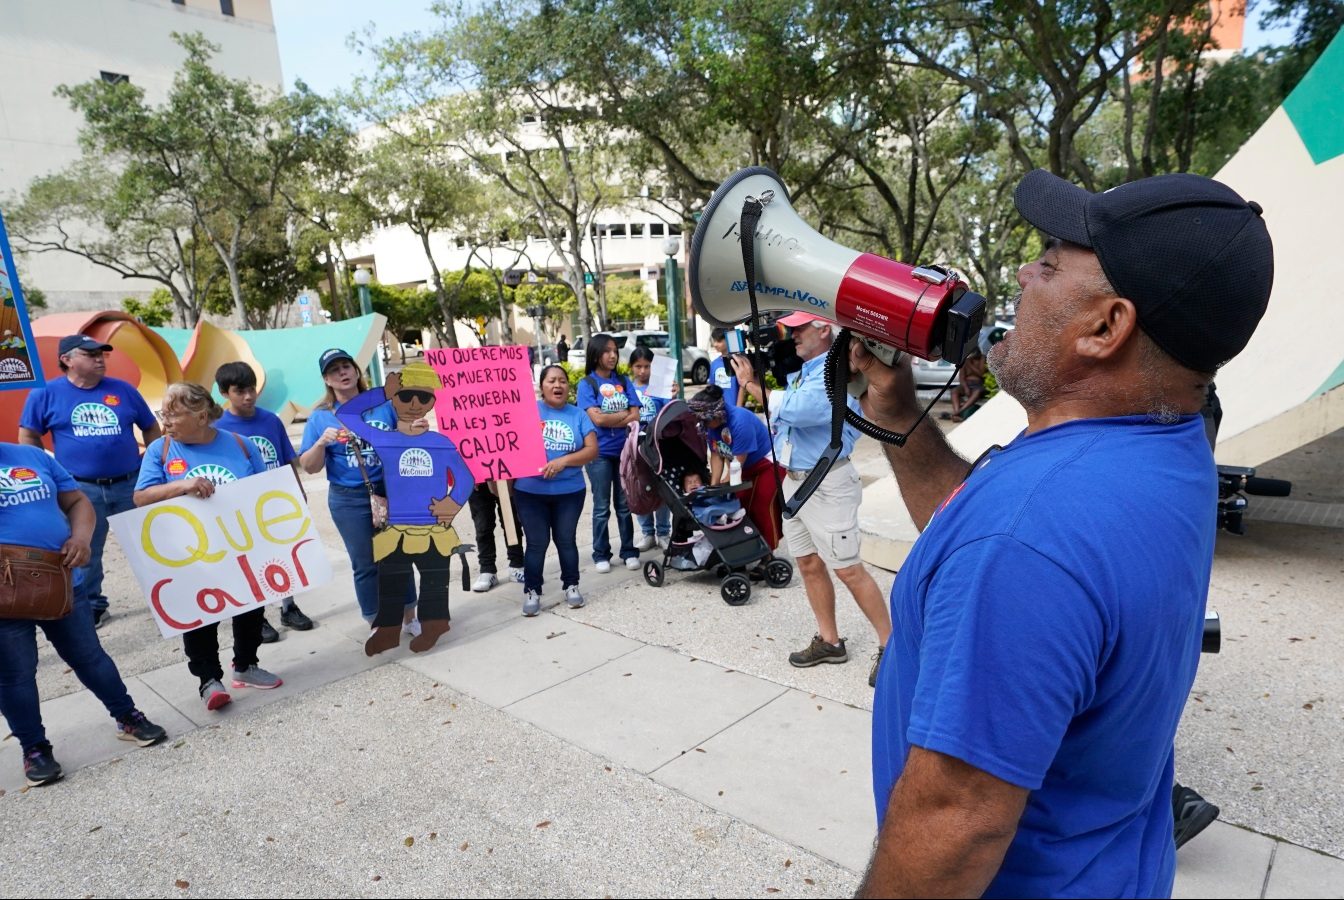 A man with a megaphone speaks to a small group of protesters